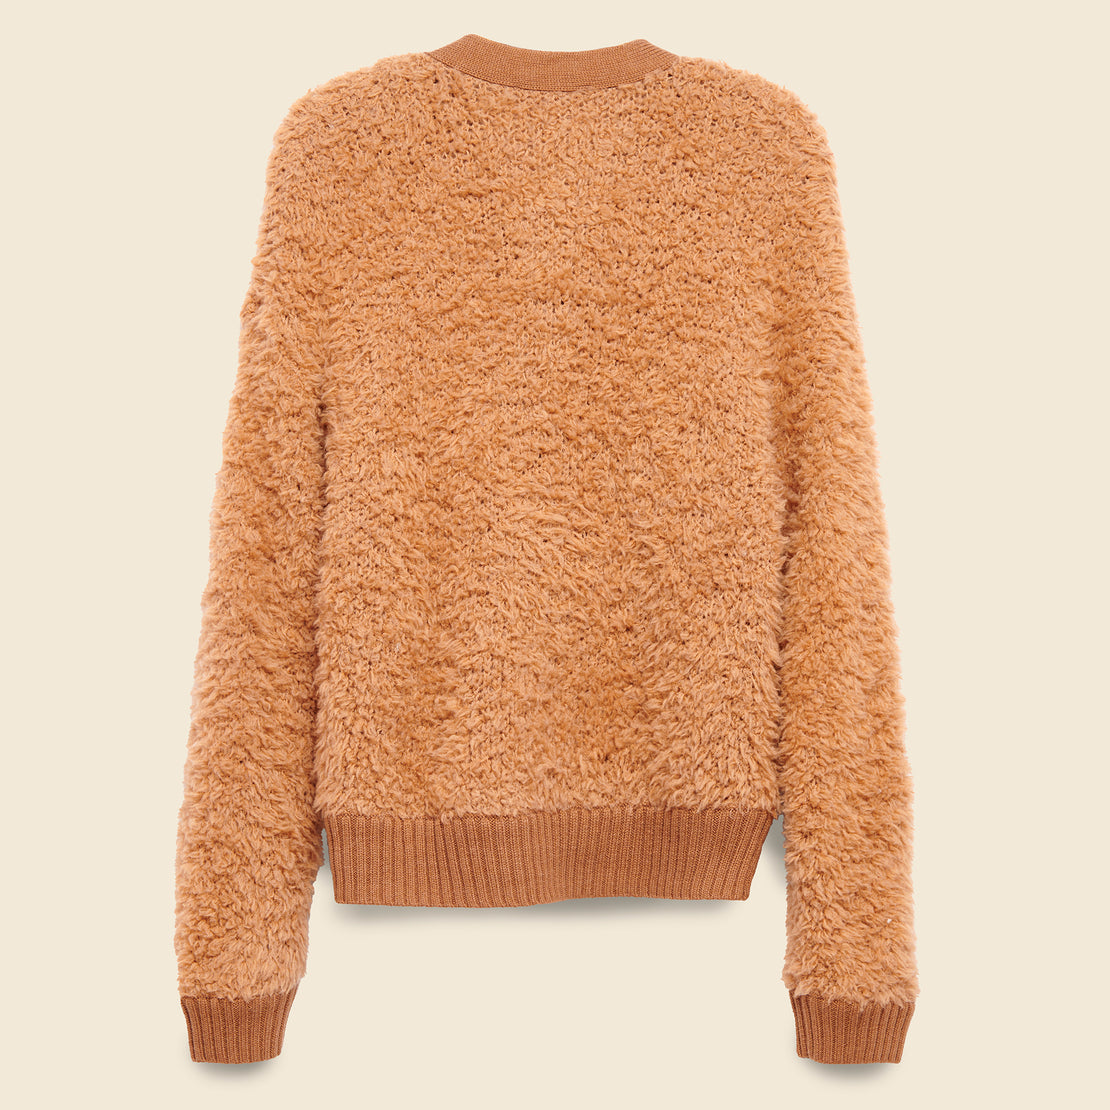 Wooly Cardigan - Terracotta - Alex Mill - STAG Provisions - W - Tops - Sweater